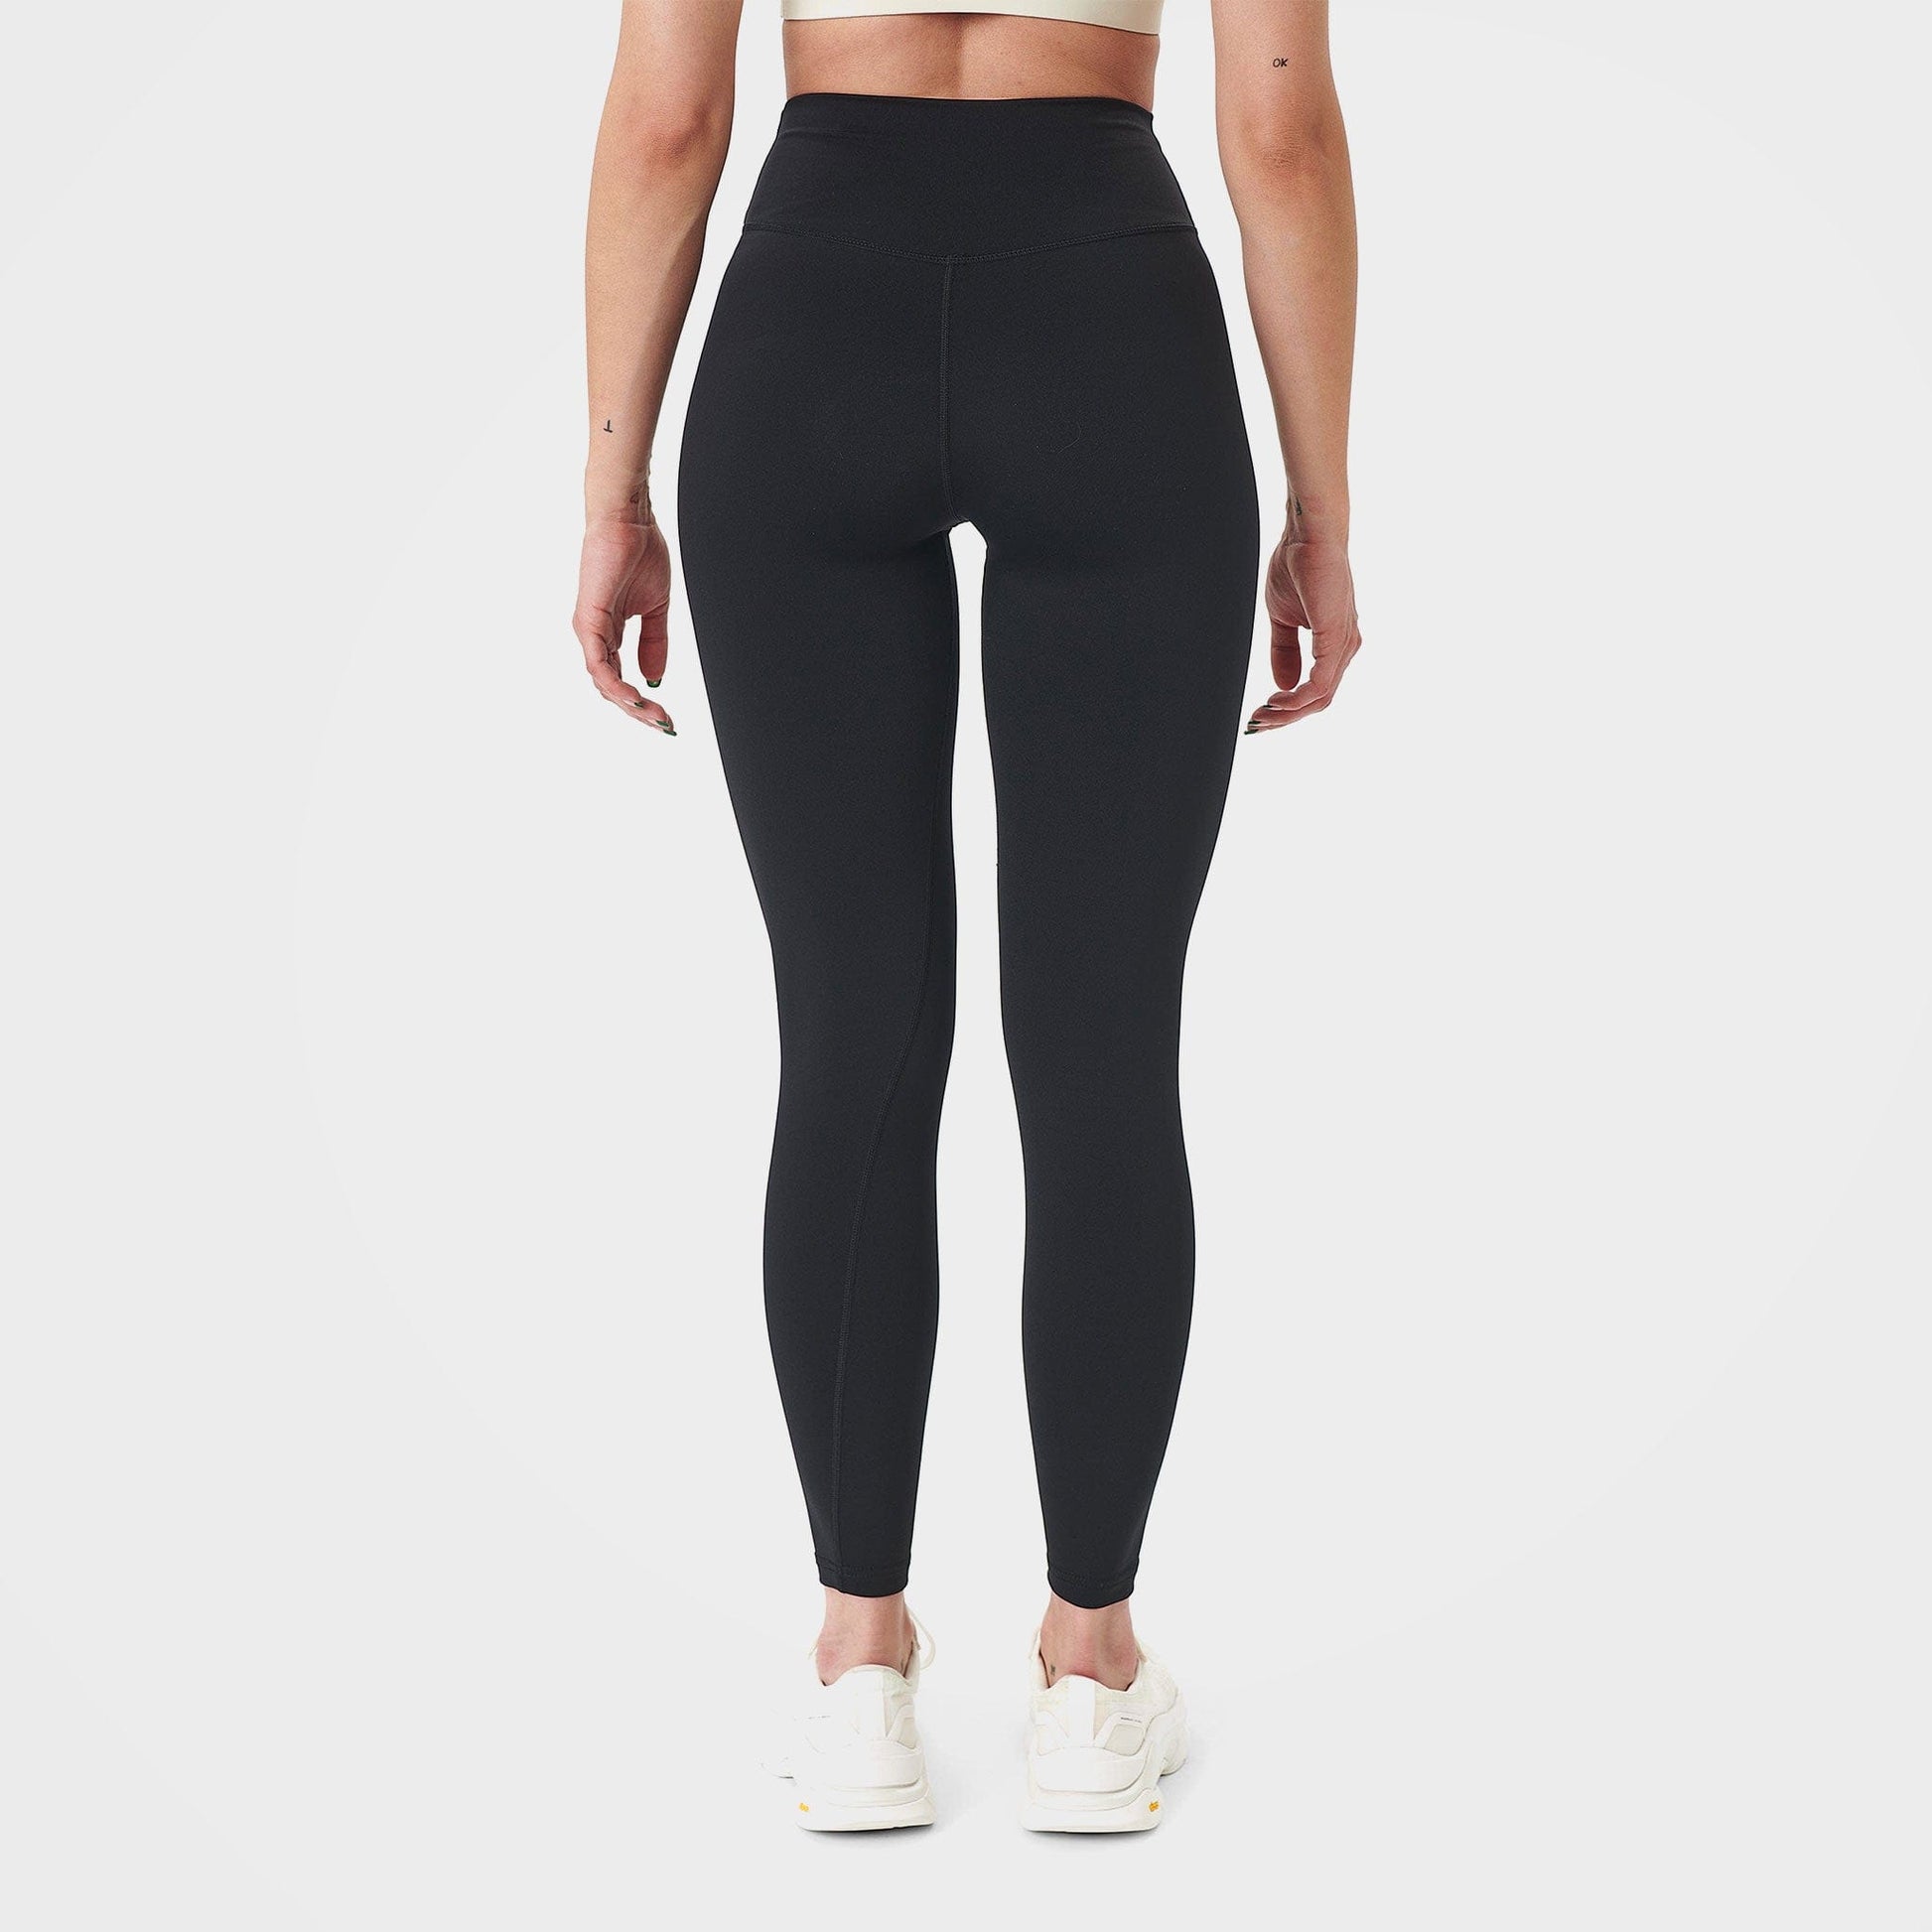 Black Women's Leggings, Signature Tights by 7Days Active